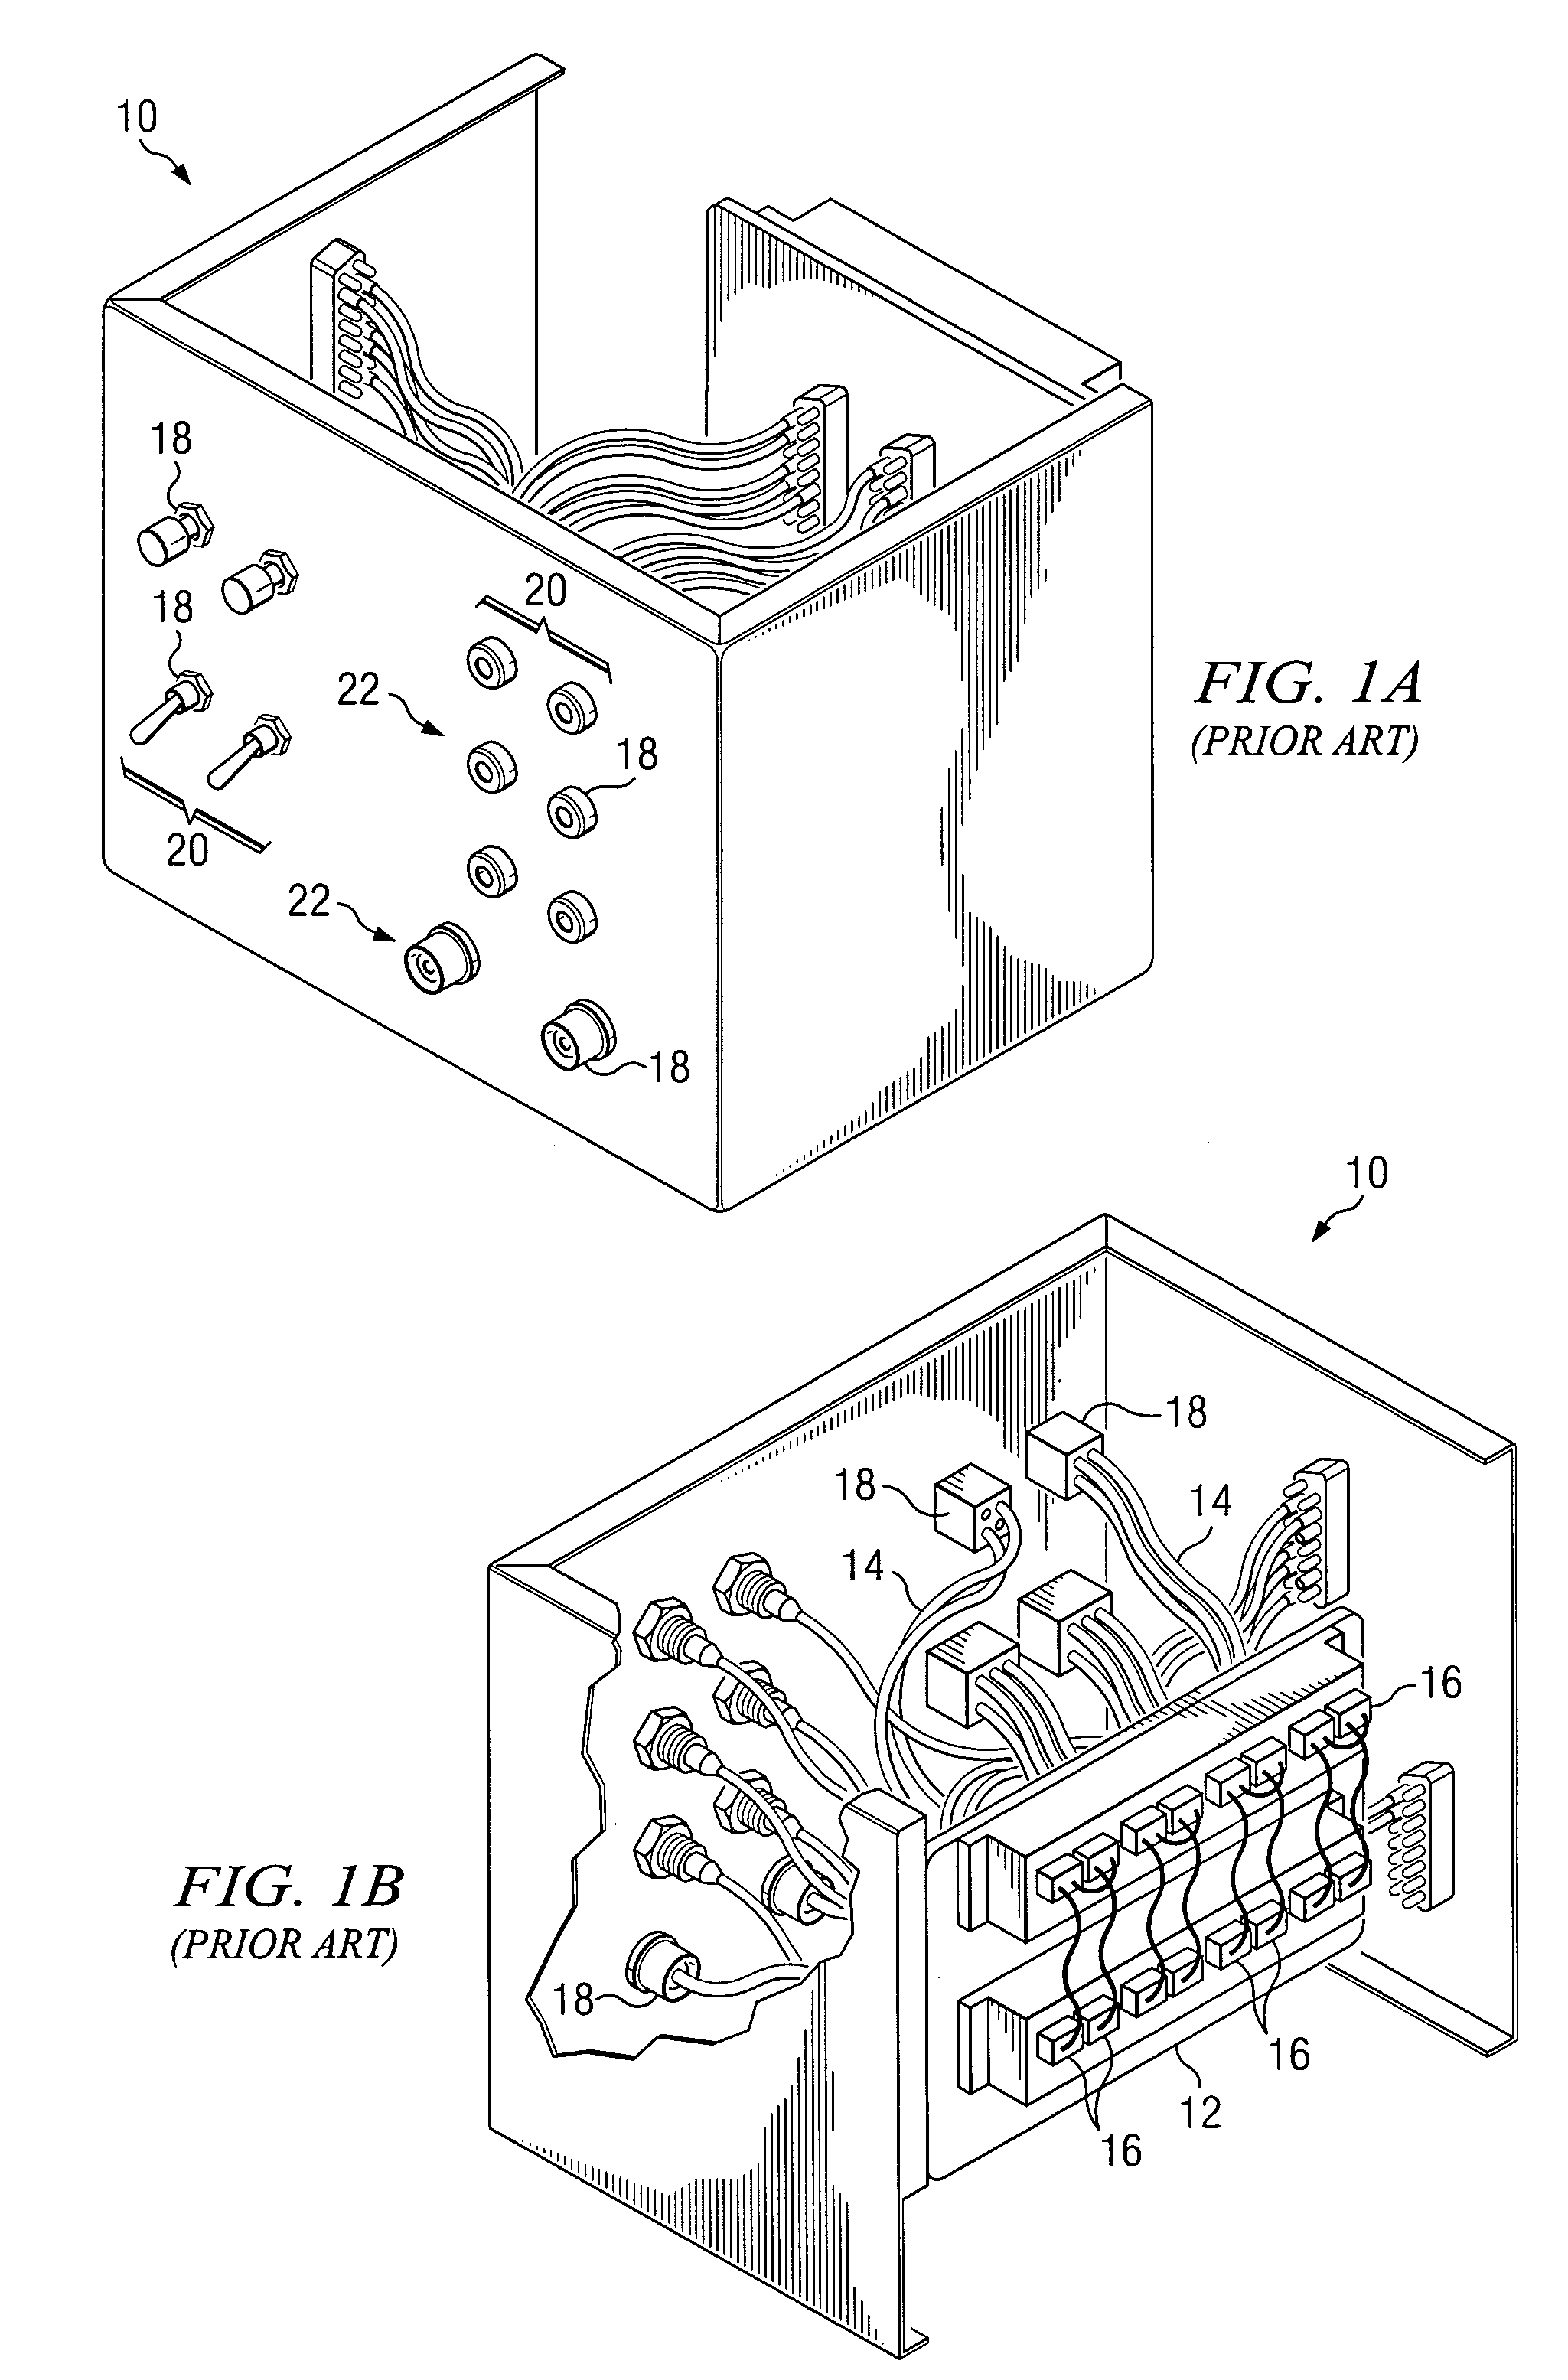 Methods and systems for rapid prototyping of high density circuits